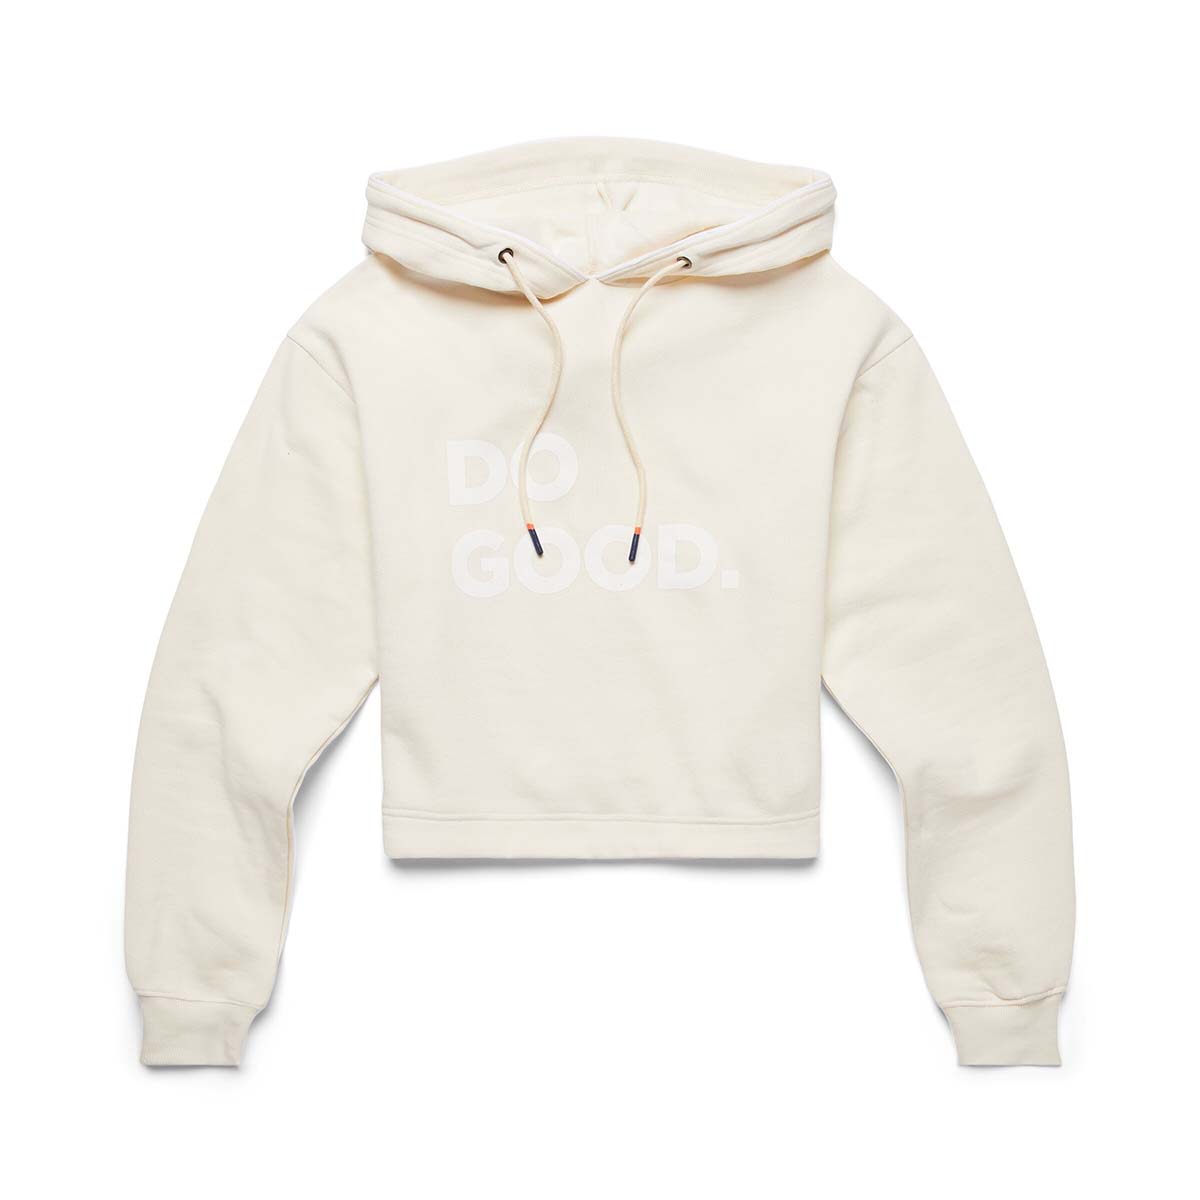 Cotopaxi Women's Do Good Pullover Hoodie